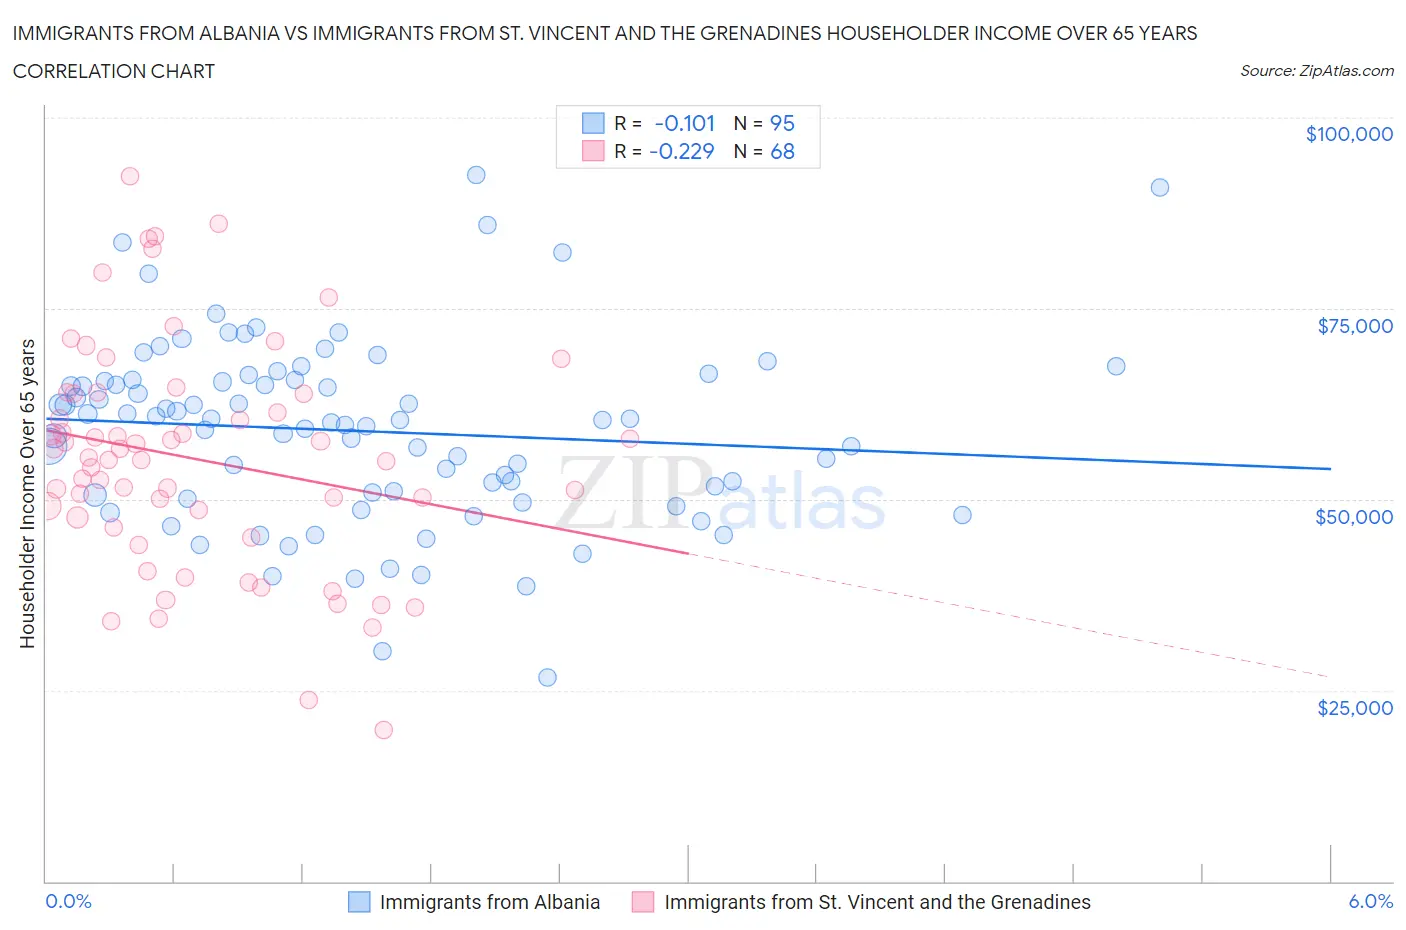 Immigrants from Albania vs Immigrants from St. Vincent and the Grenadines Householder Income Over 65 years